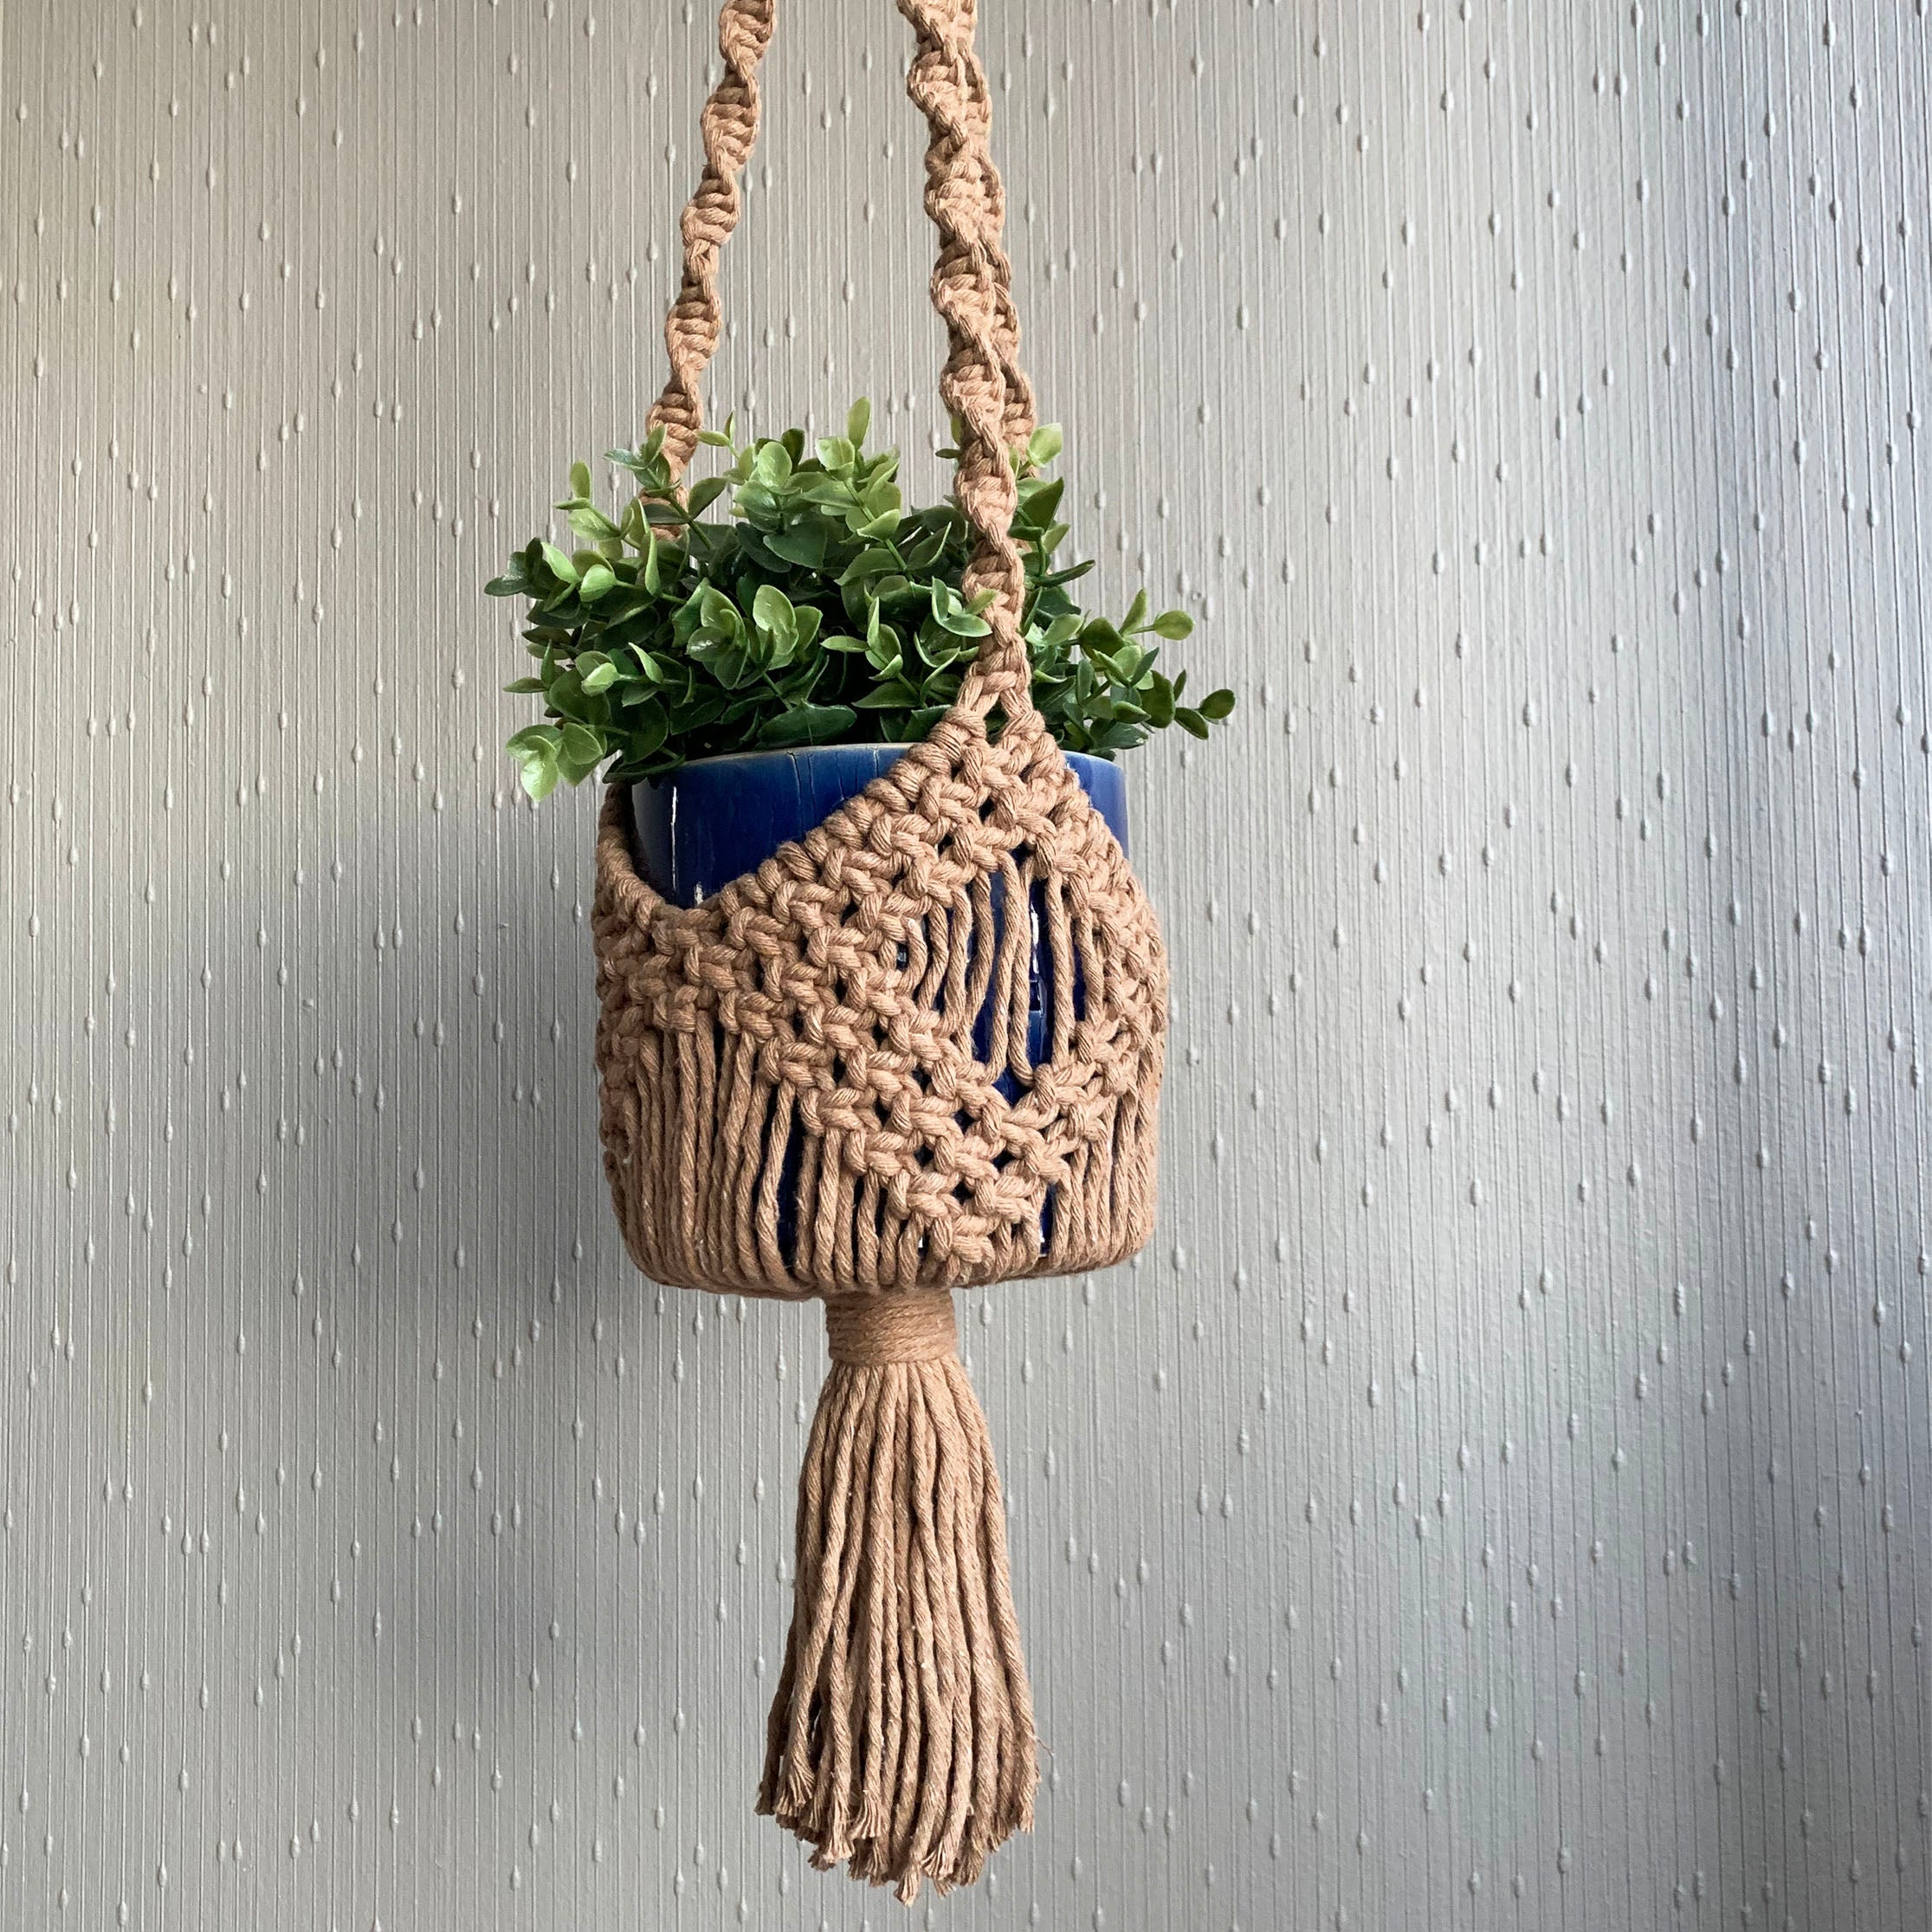 Intricate macrame knots on a brown boho basket plant hanger with a green plant in a blue planter